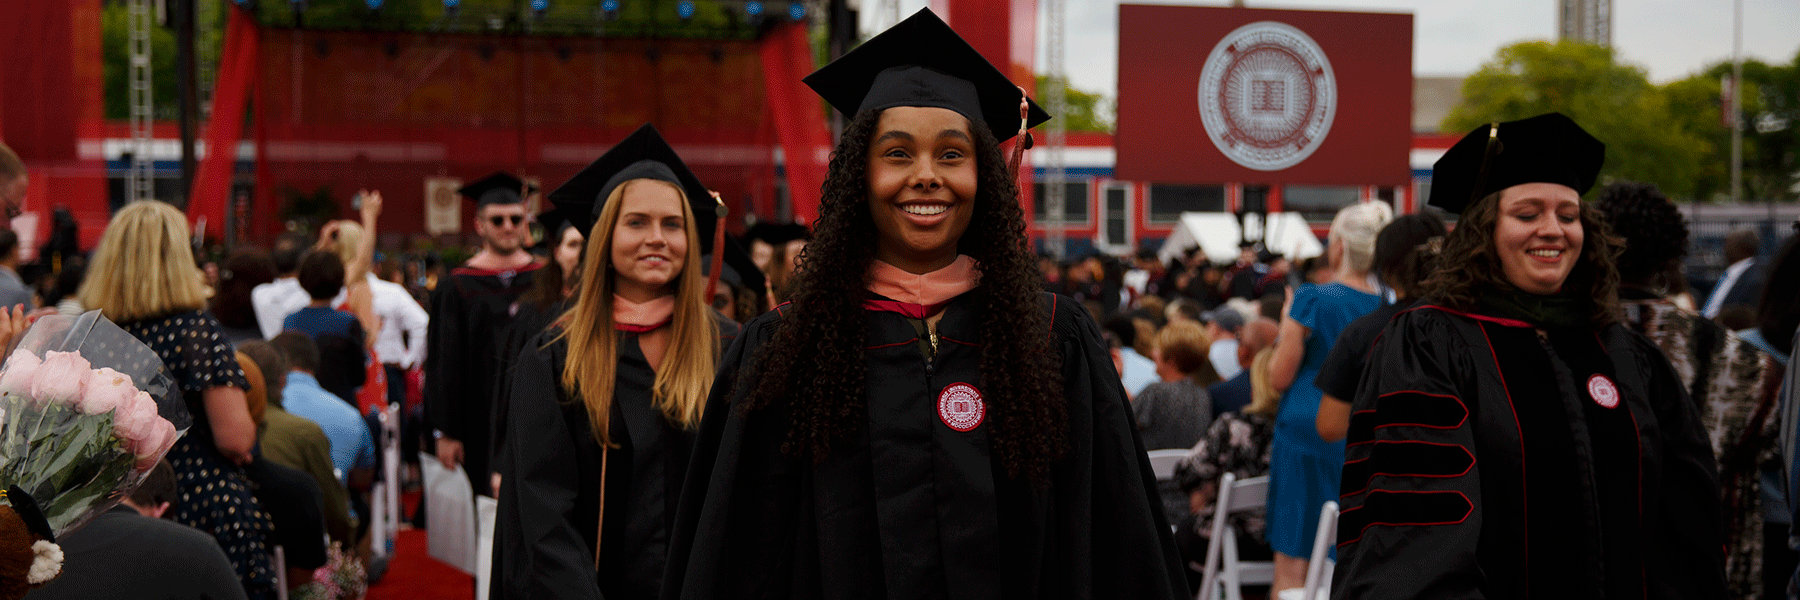 A female graduate and two others behind her smile as they walk down the aisle after the commencement ceremony.